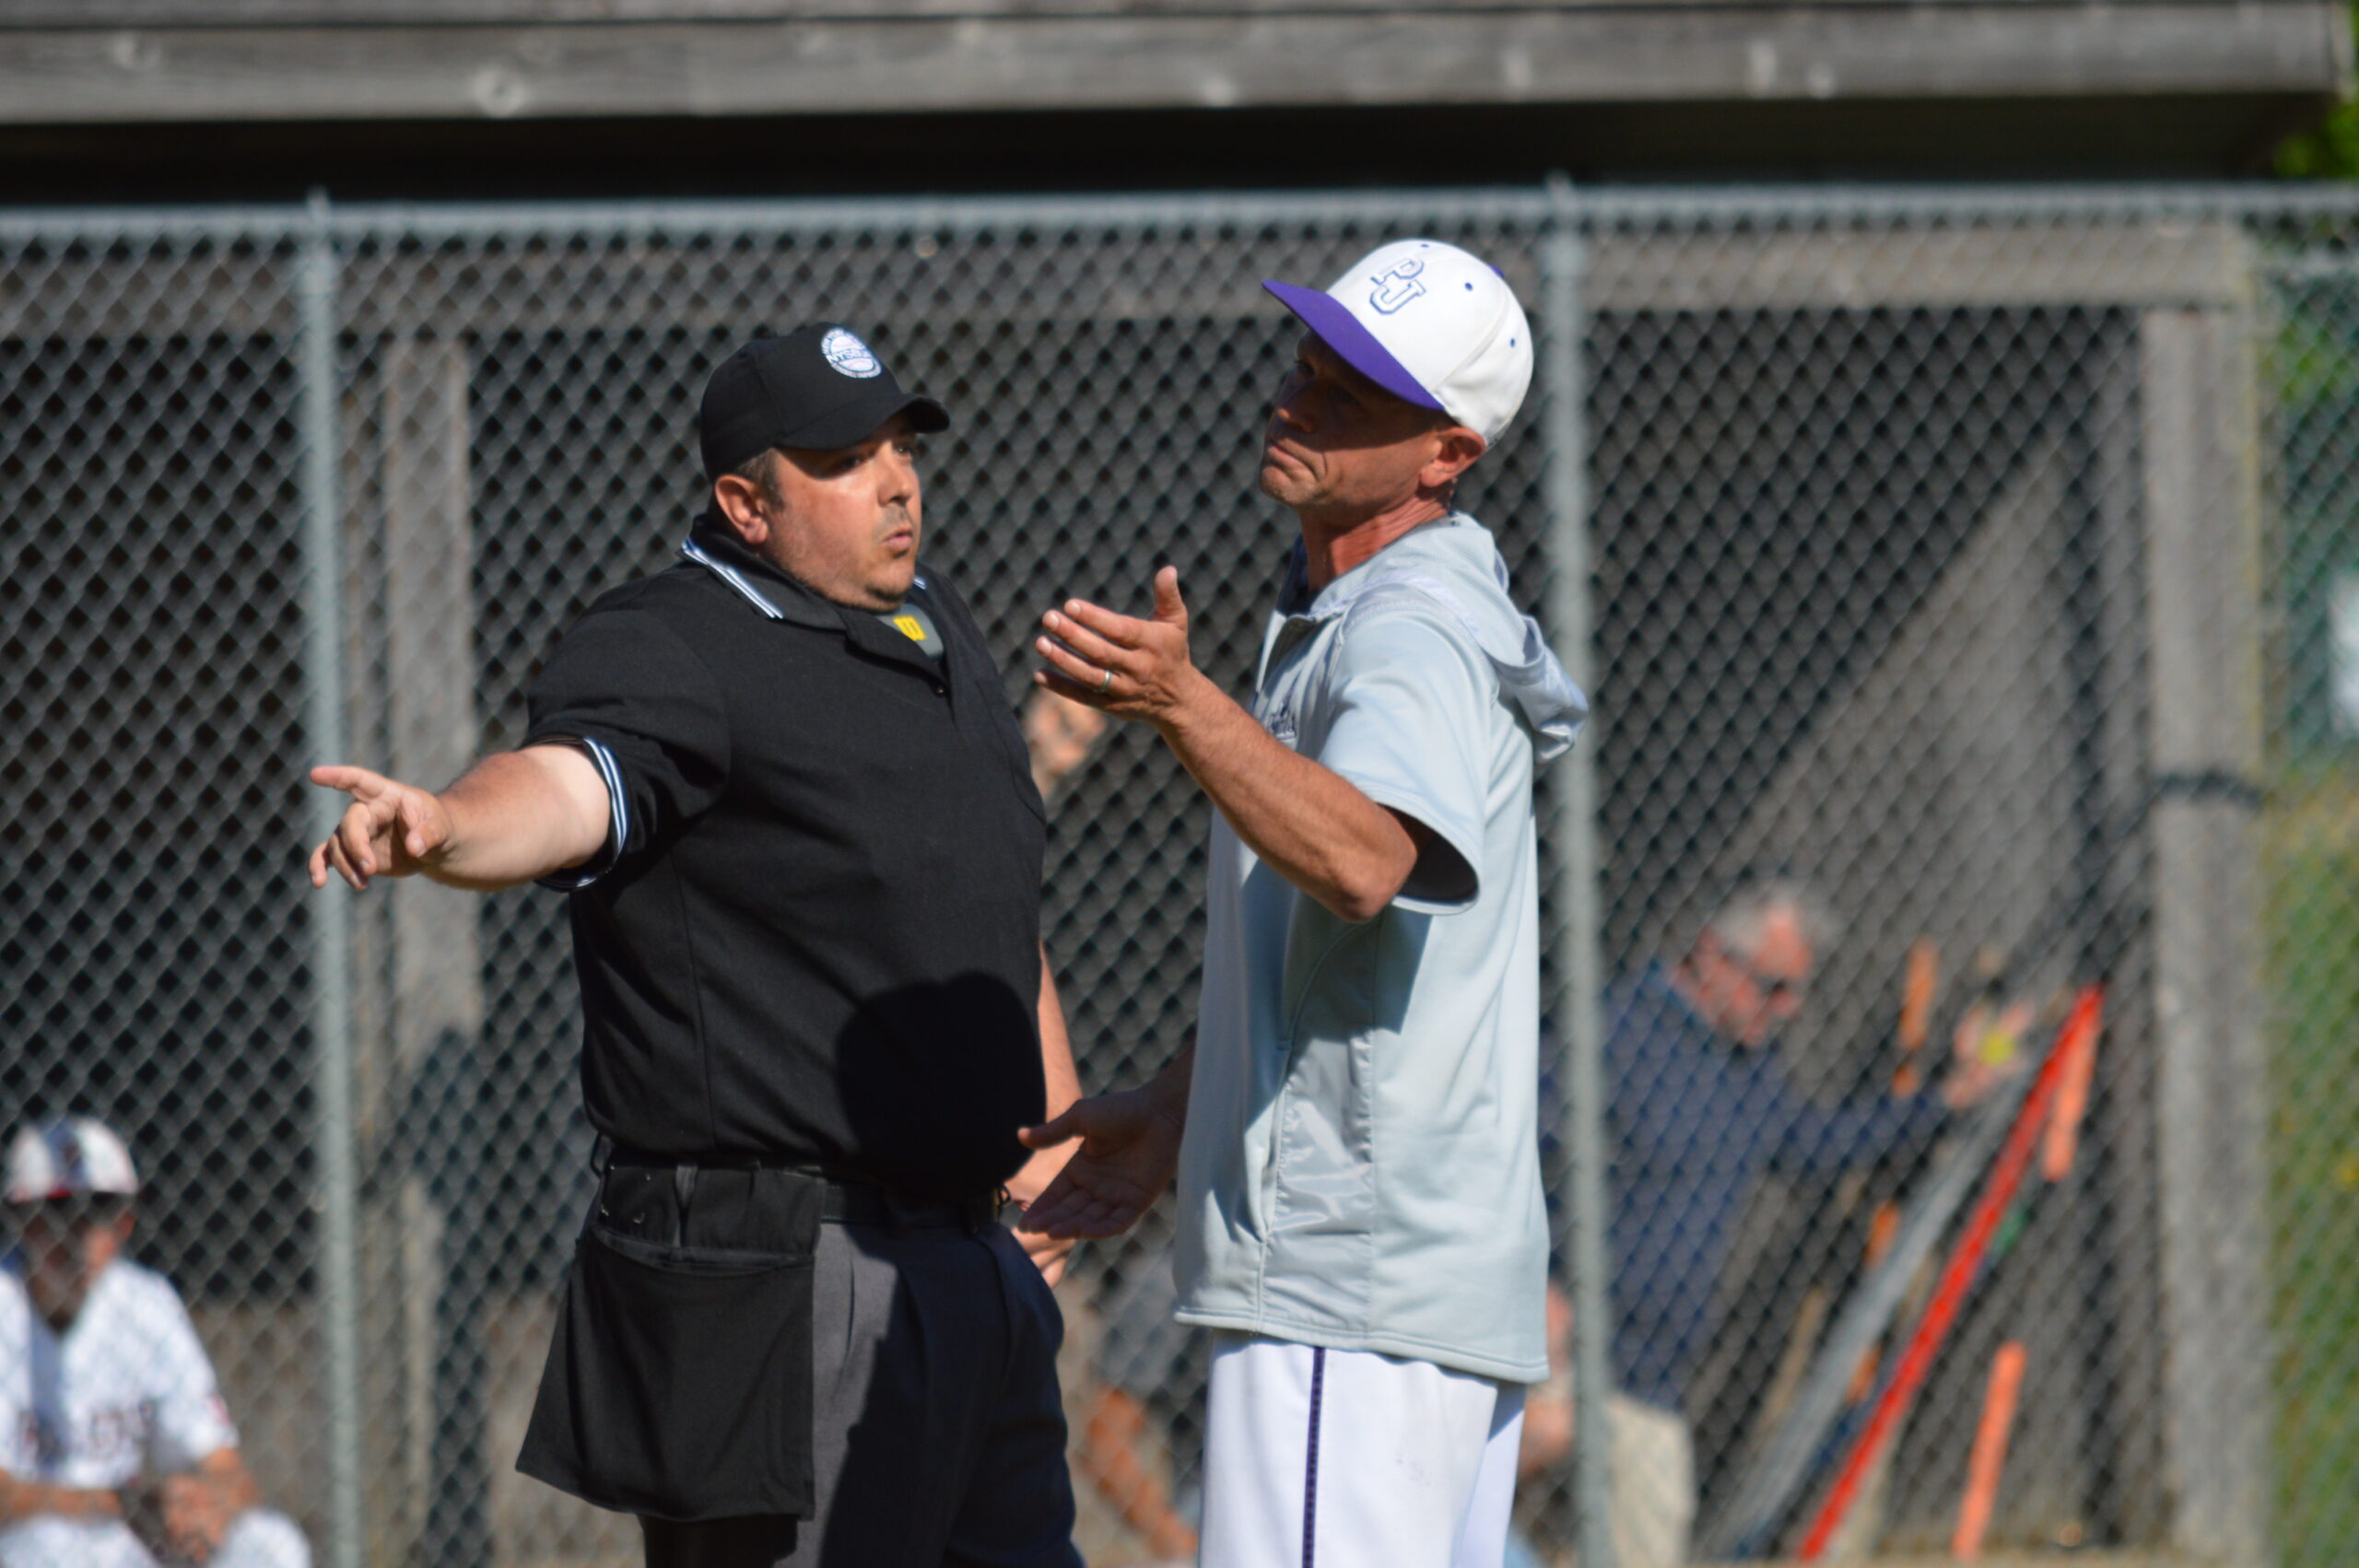 Port Jefferson head coach Jesse Rosen talking to the home plate umpire, who was kept very busy in Tuesday’s playoff game in Sag Harbor.